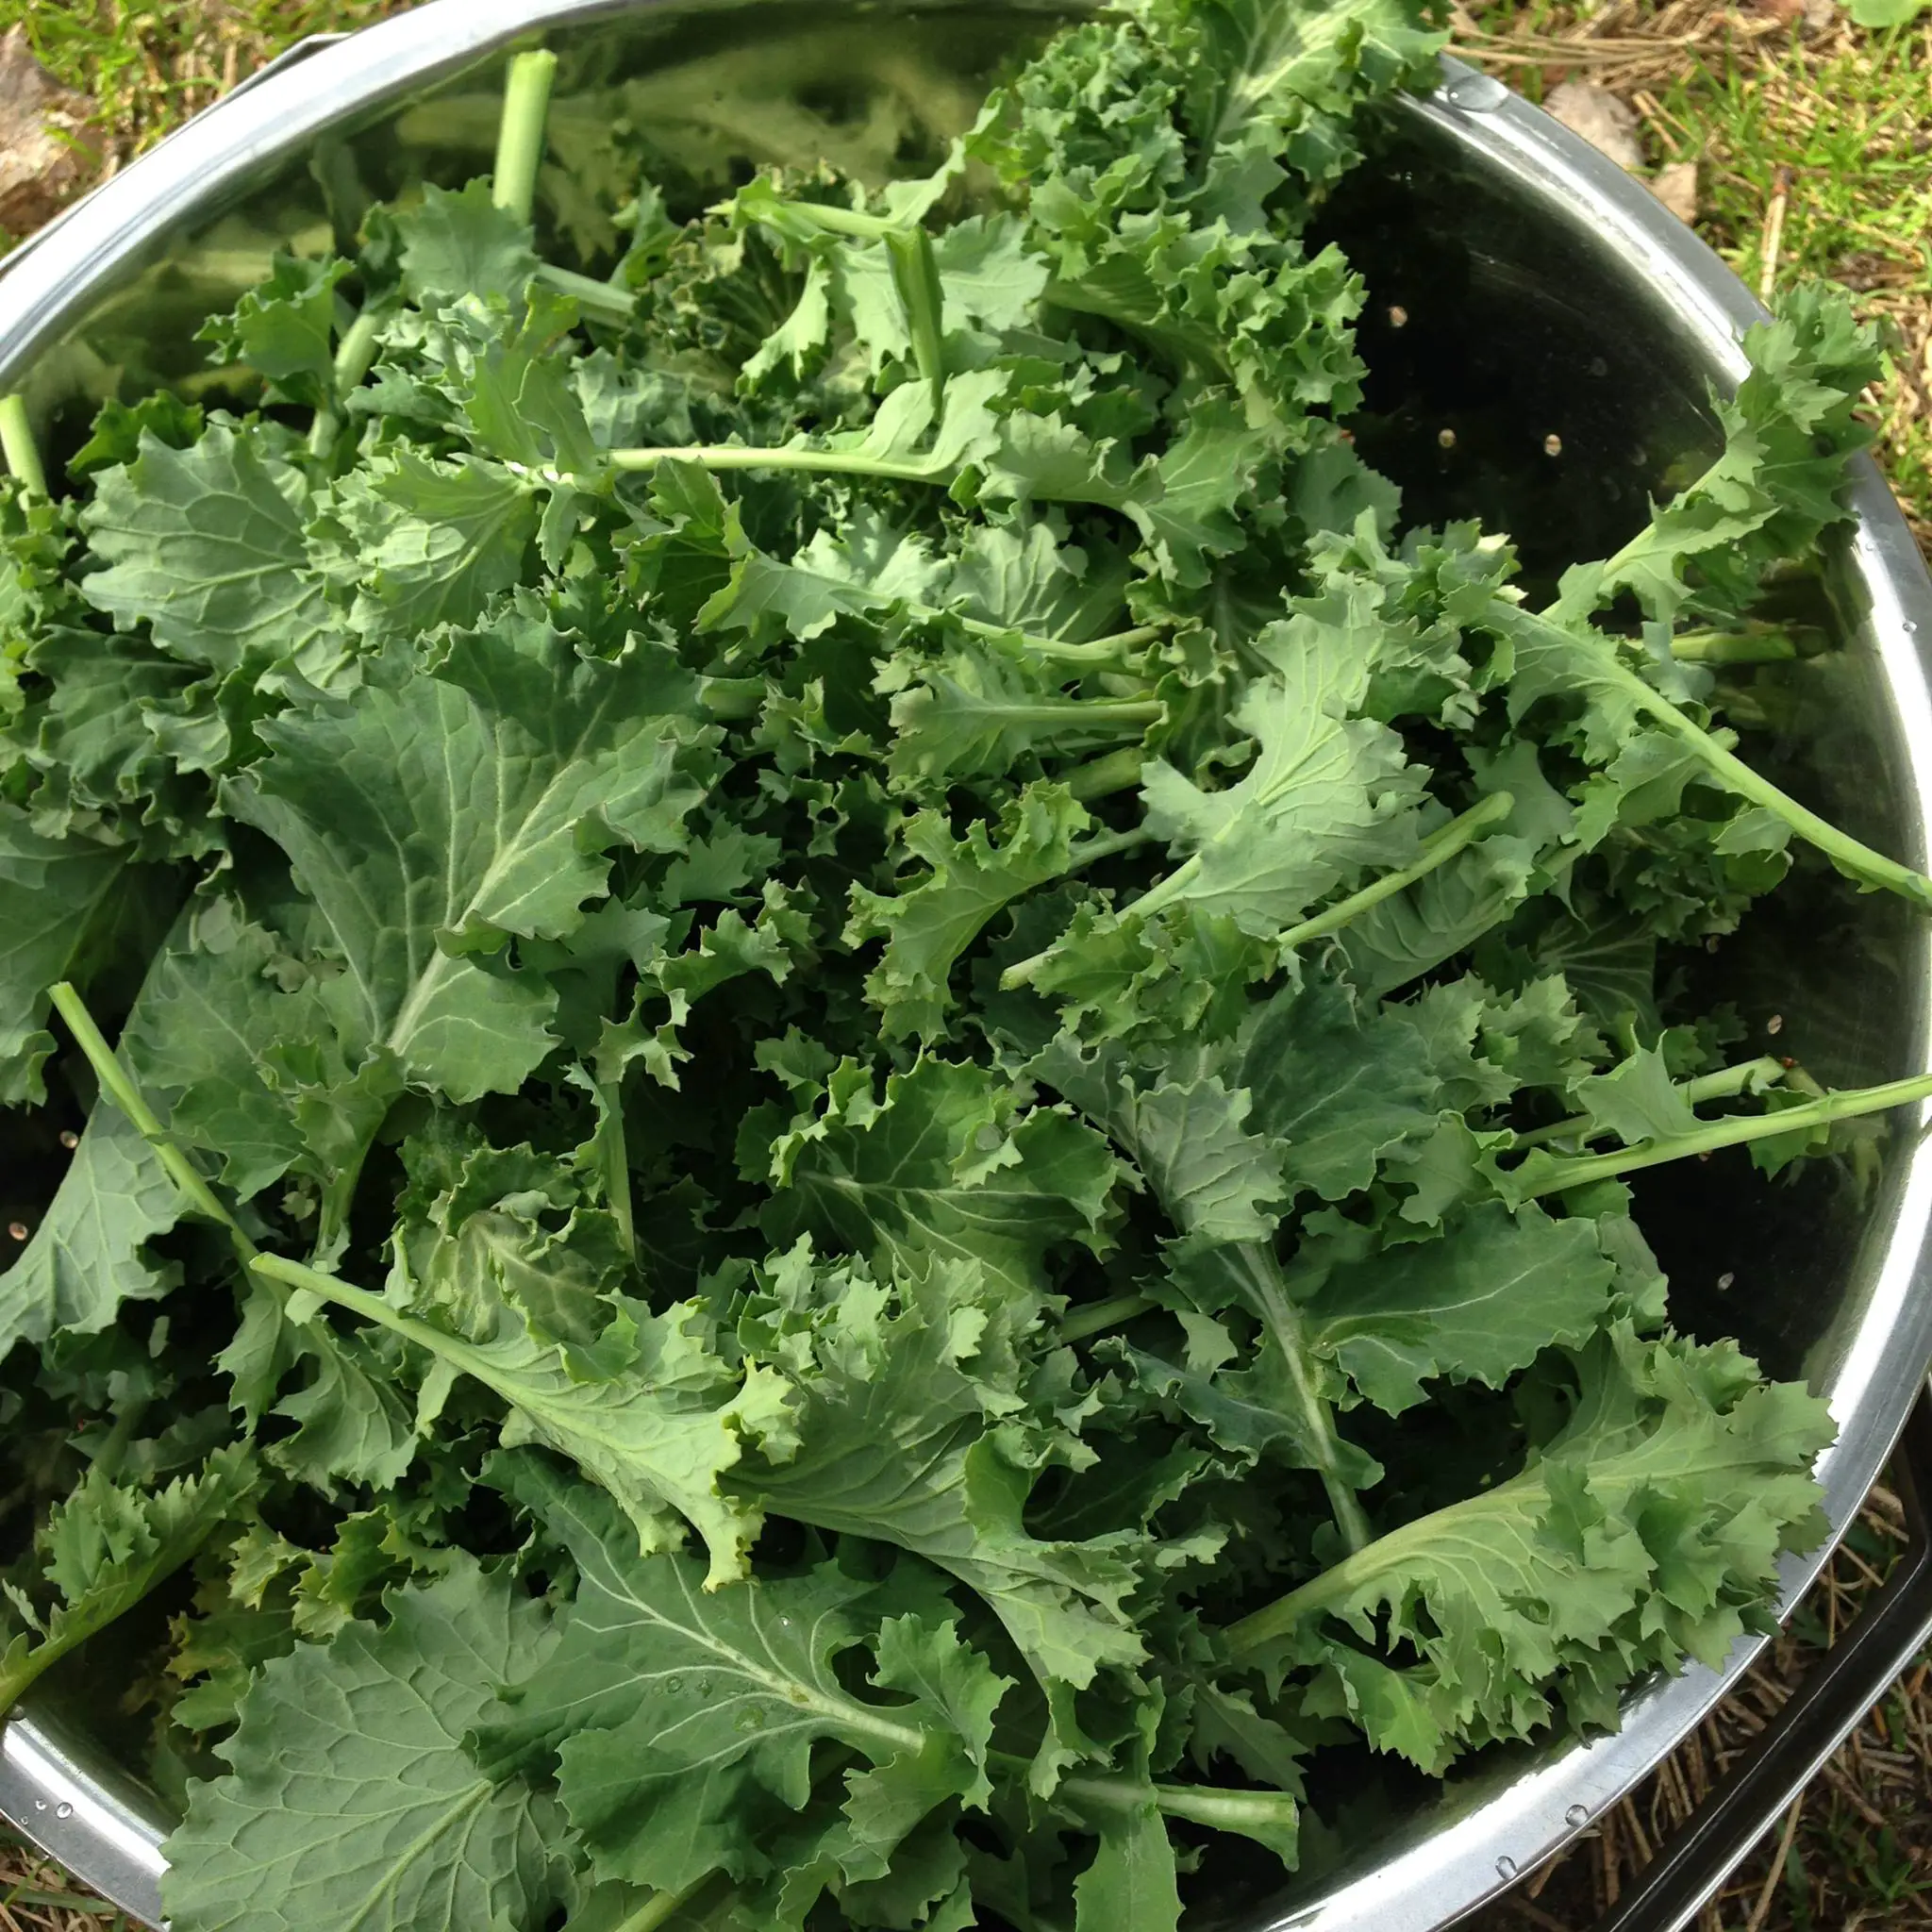 overwintering veggies is a great way to get more from your spring garden